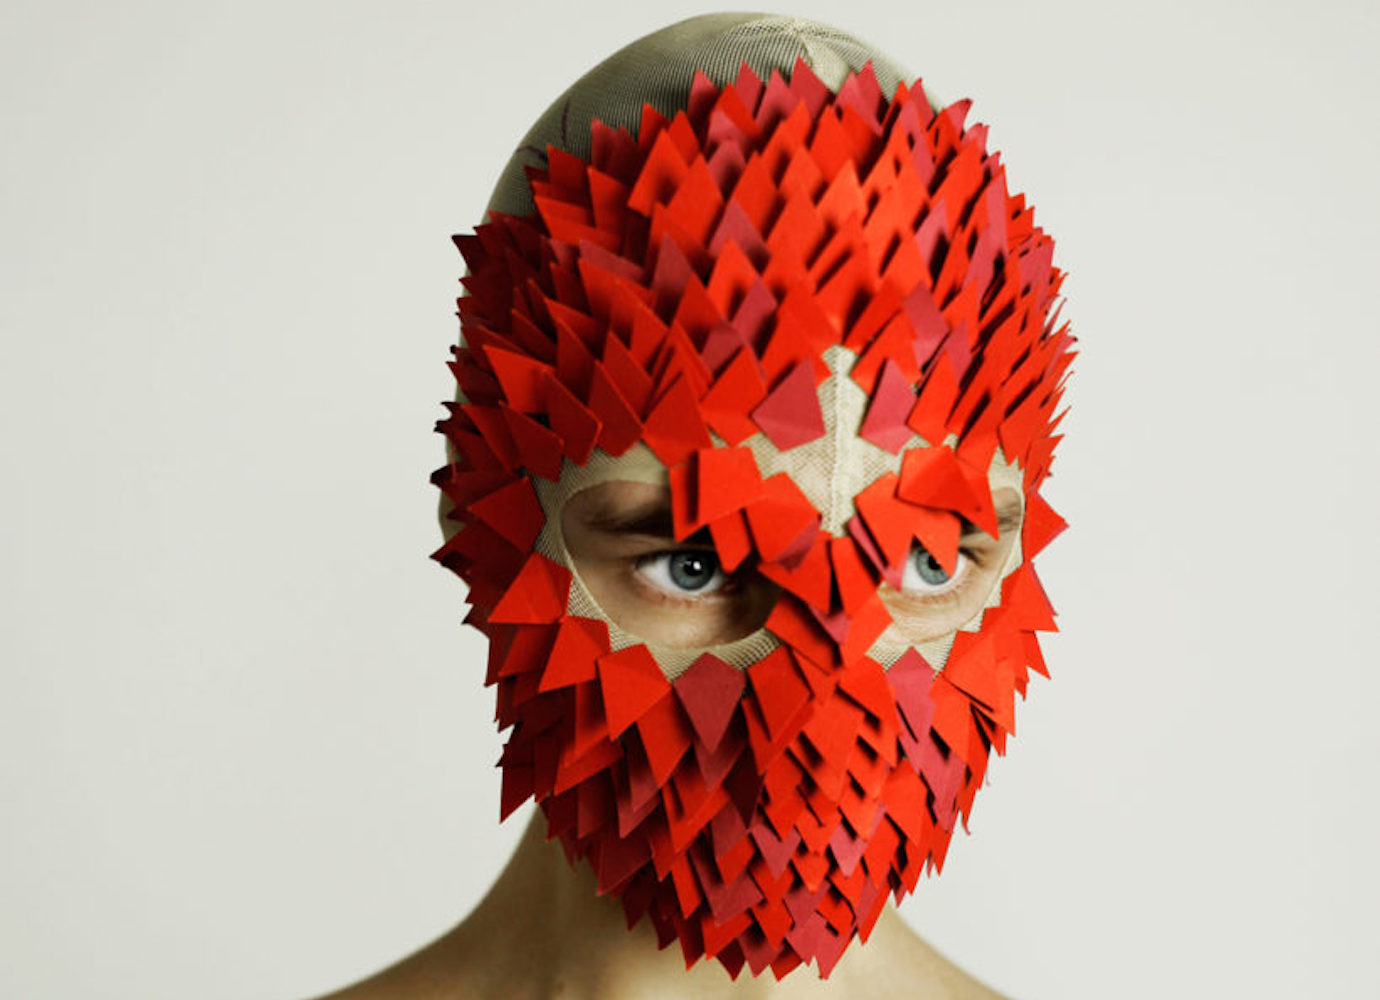 The fashion designer making masks inspired by tech, body parts and Siberian myths